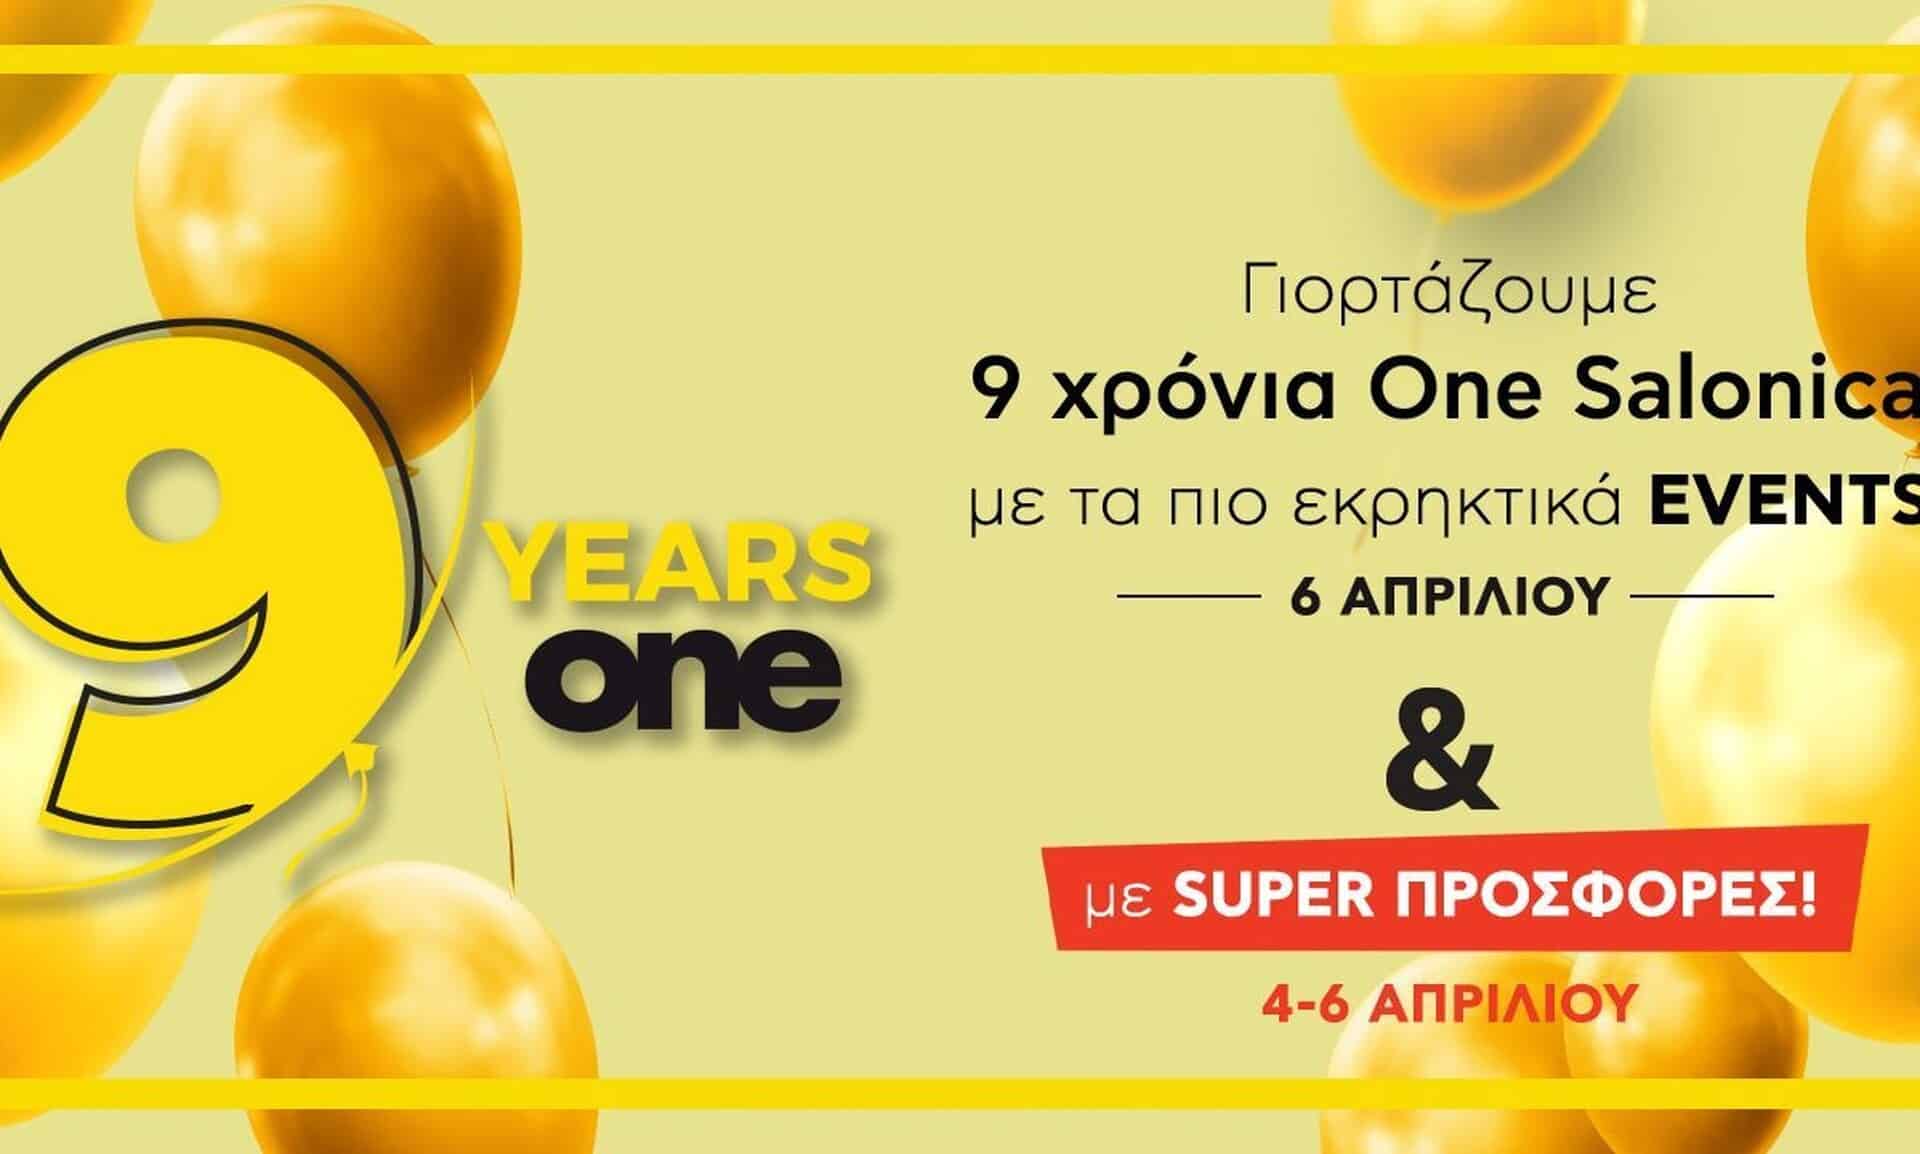 to-one-salonica-outlet-mall-κλείνει-τα-9-και-σας-προσκαλεί-σε-ένα-all-day-birthday-party